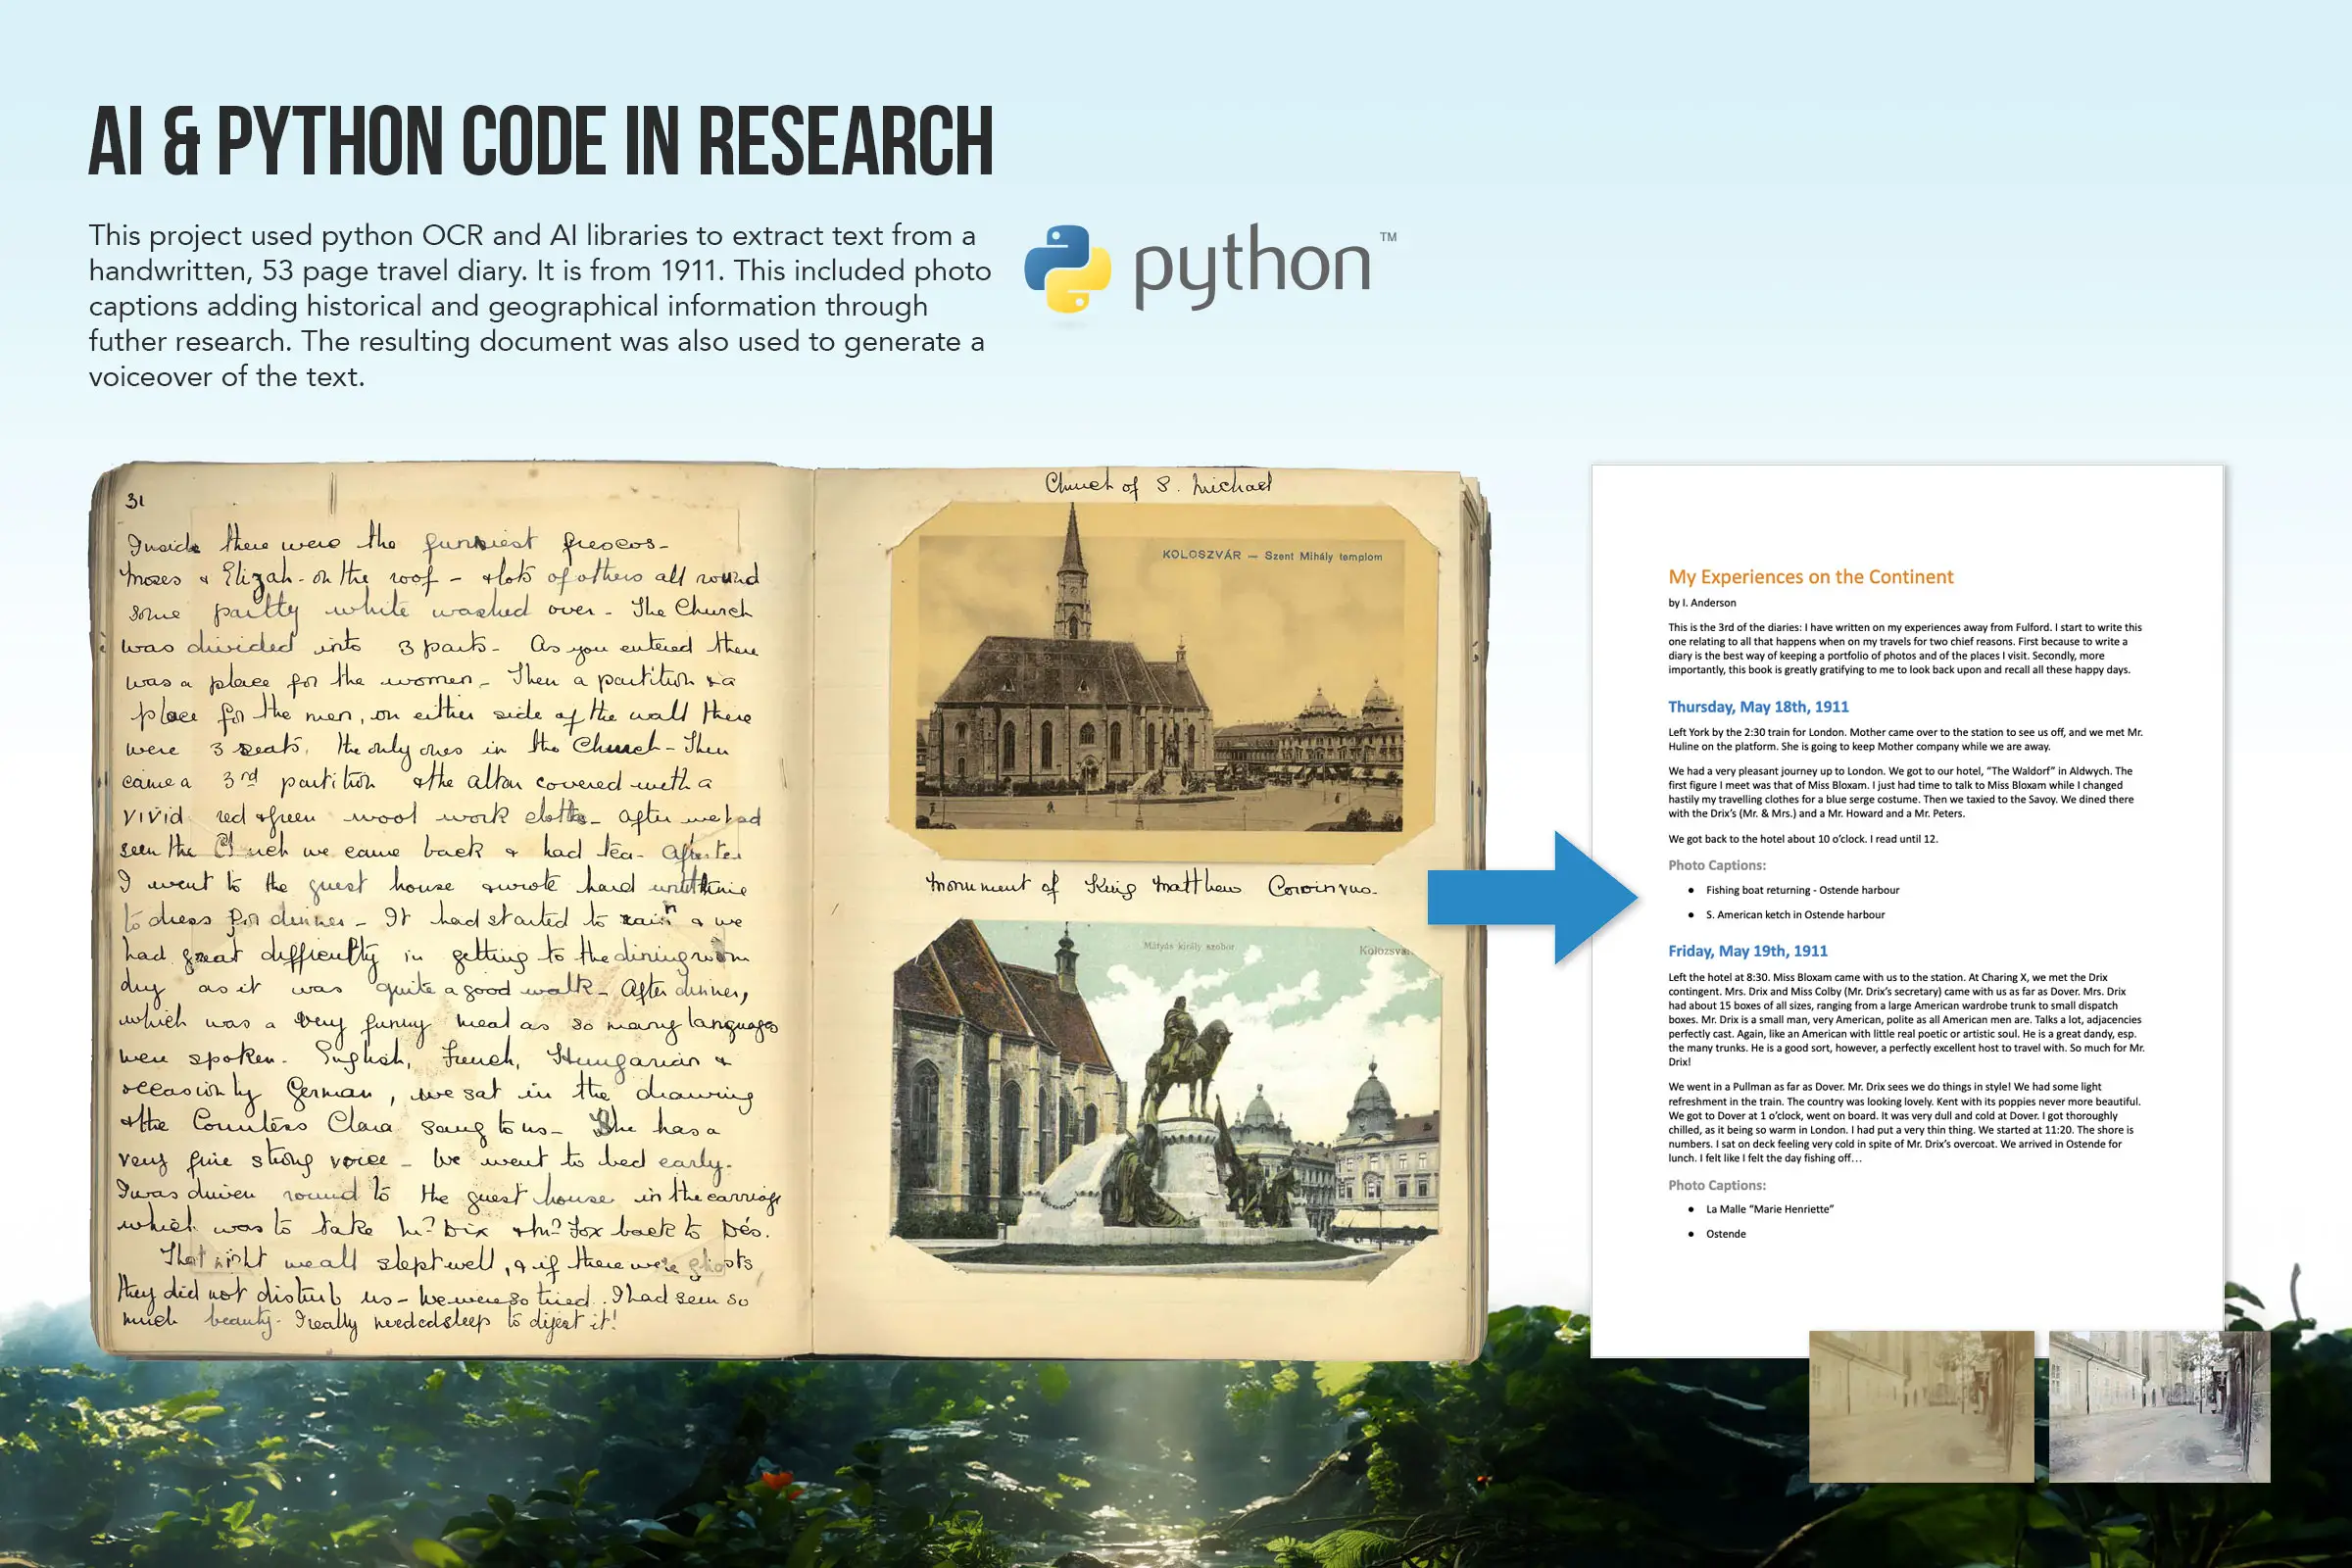 AI and Python in Research - Coding and AI